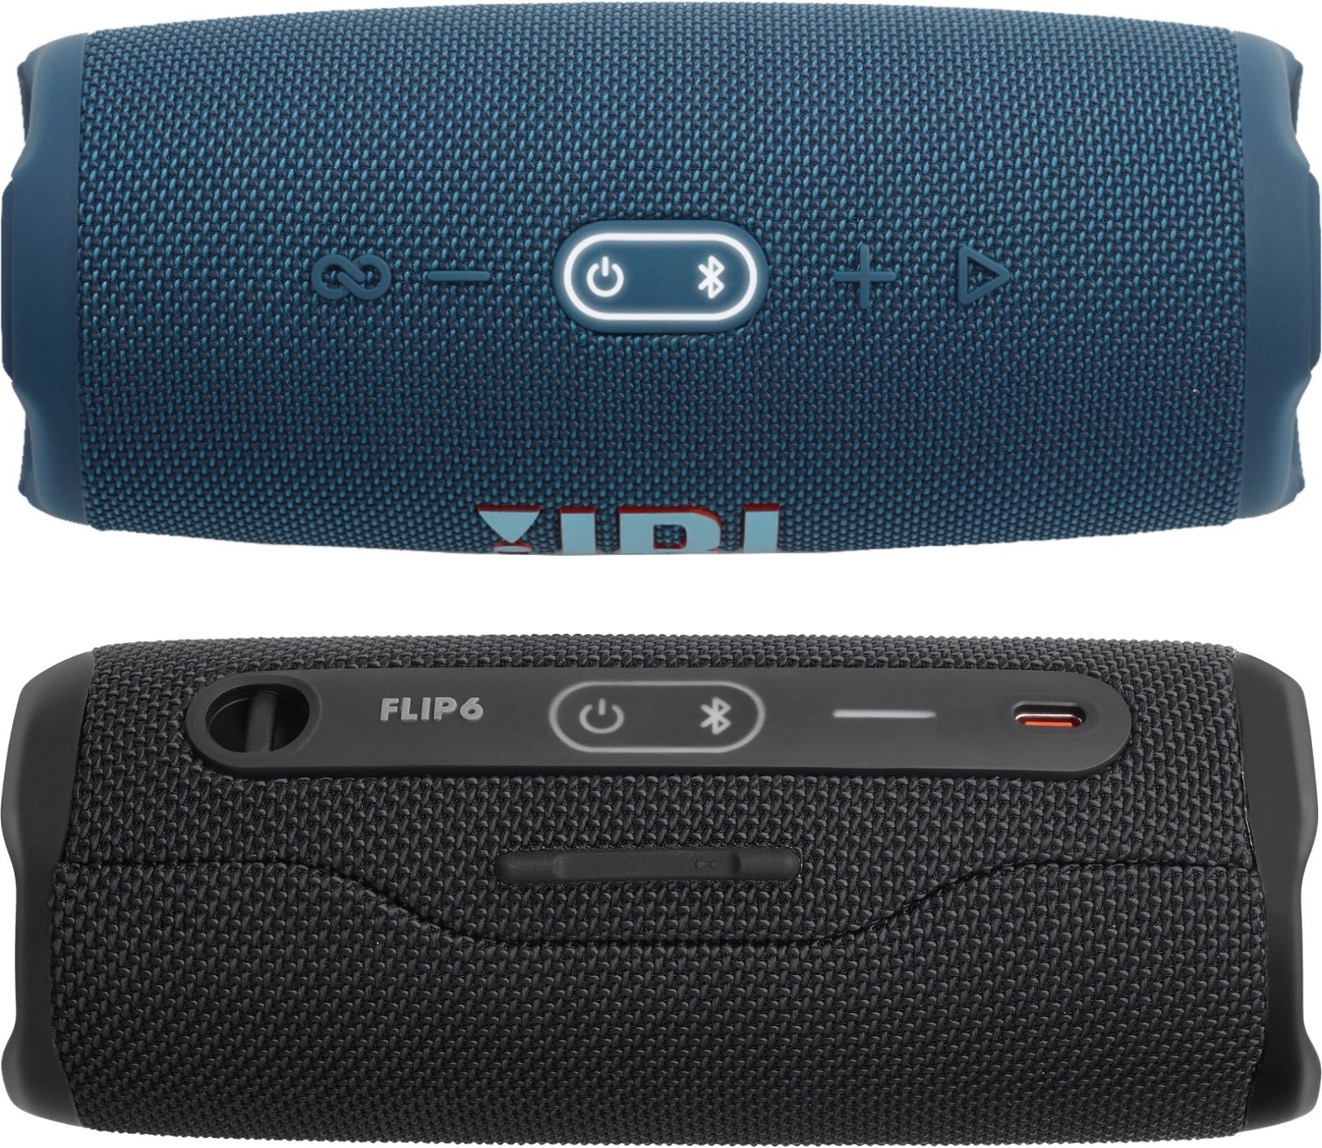 JBL Flip 6 vs Charge 5: Which is the better speaker?